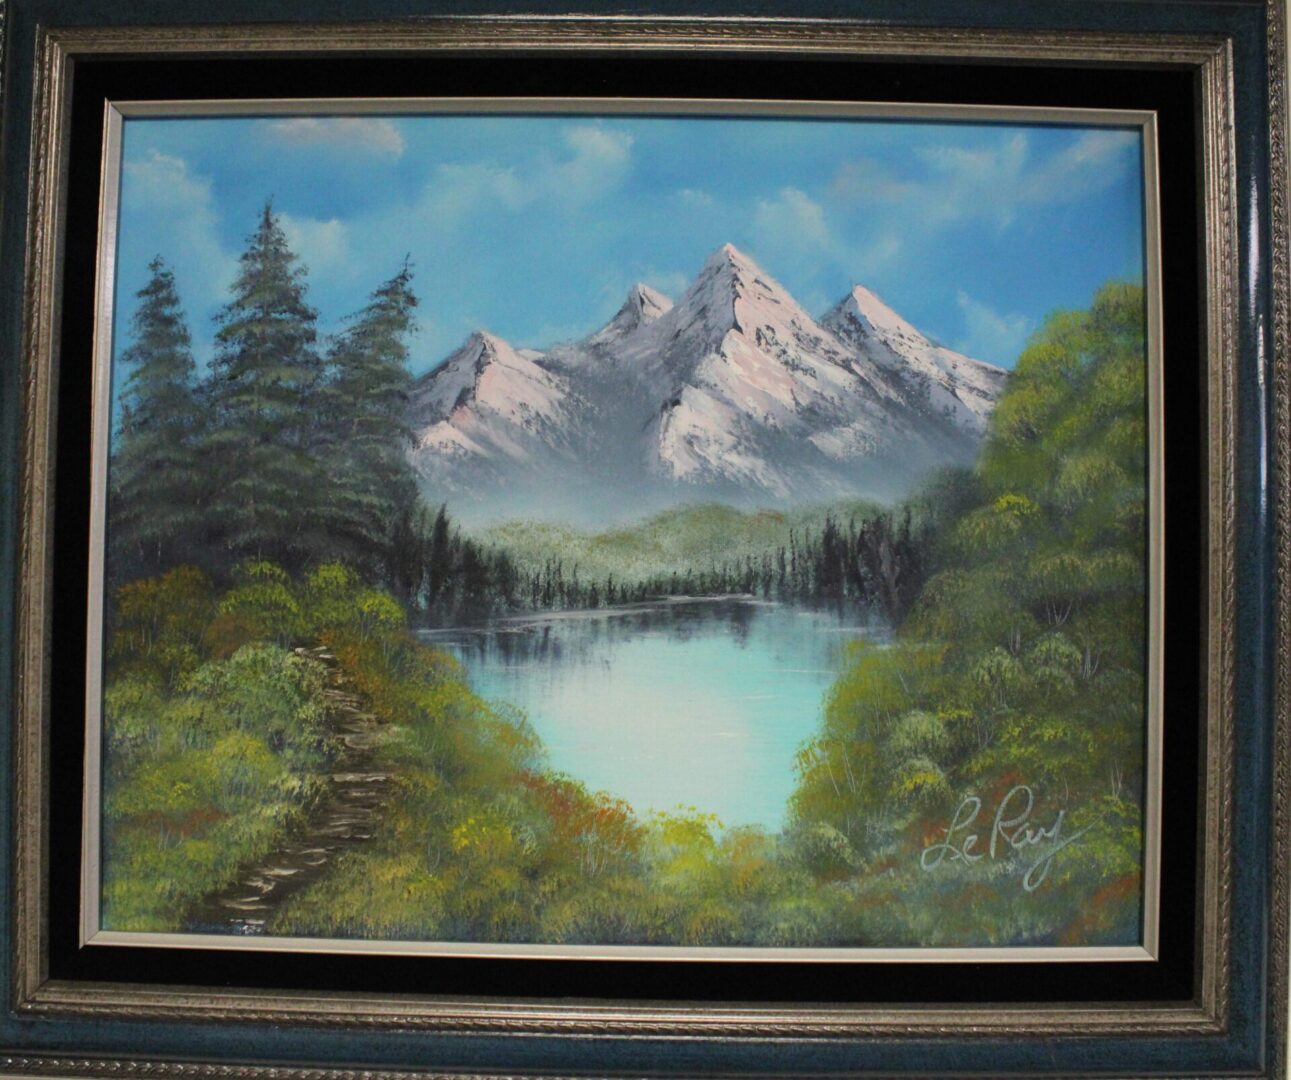 Painting of a mountain scenery with a black color frame